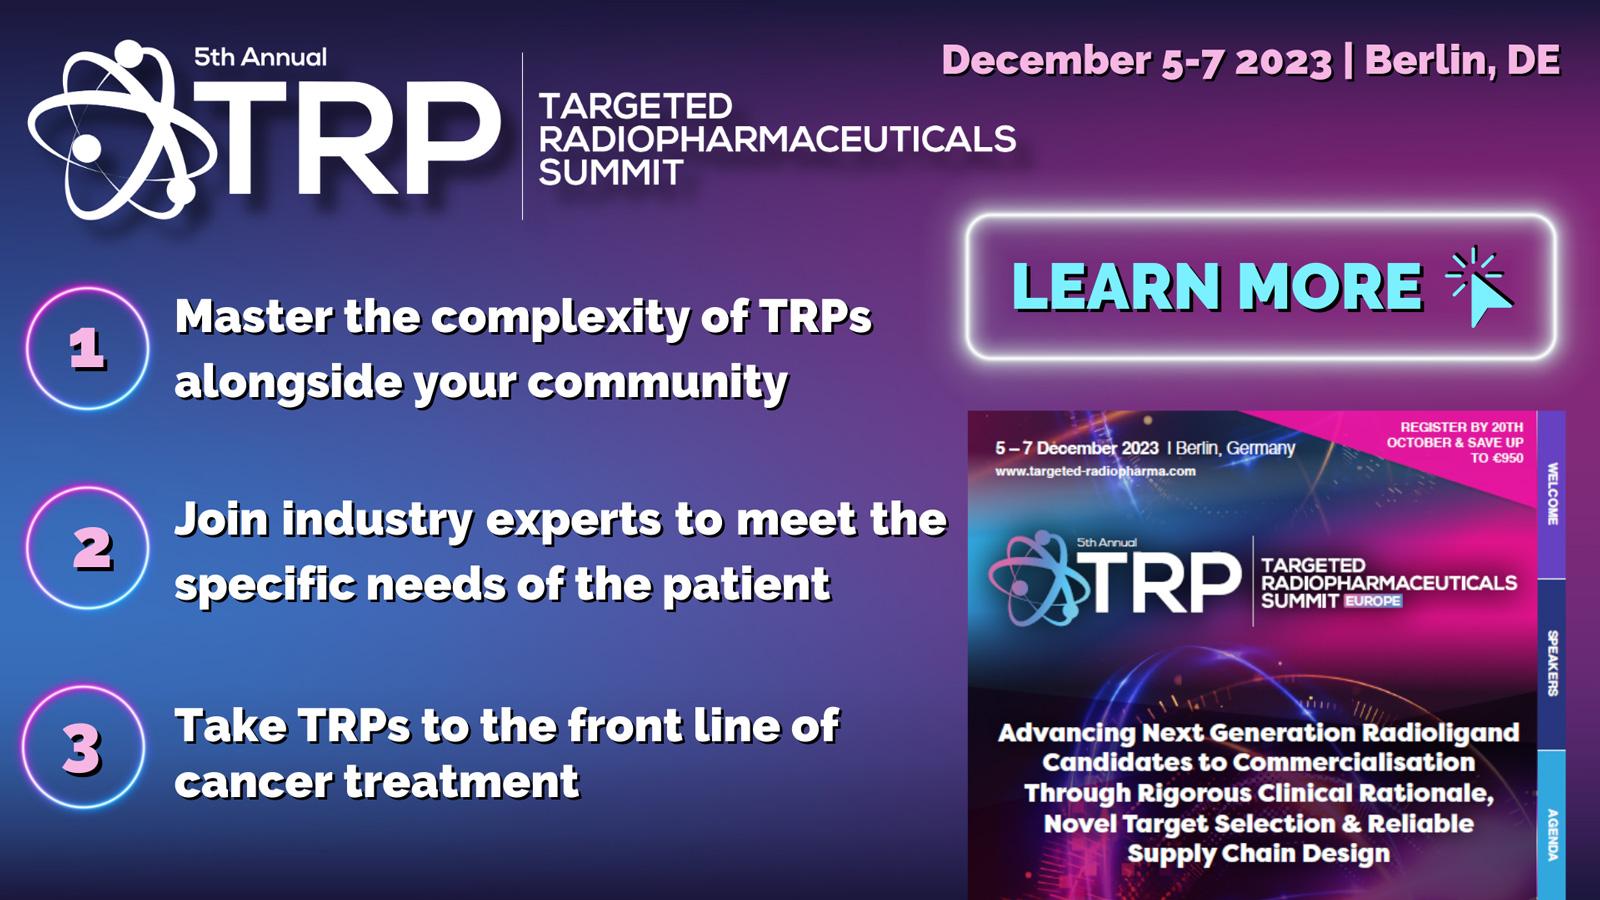 5th Targeted Radiopharmaceuticals Summit Europe 2023